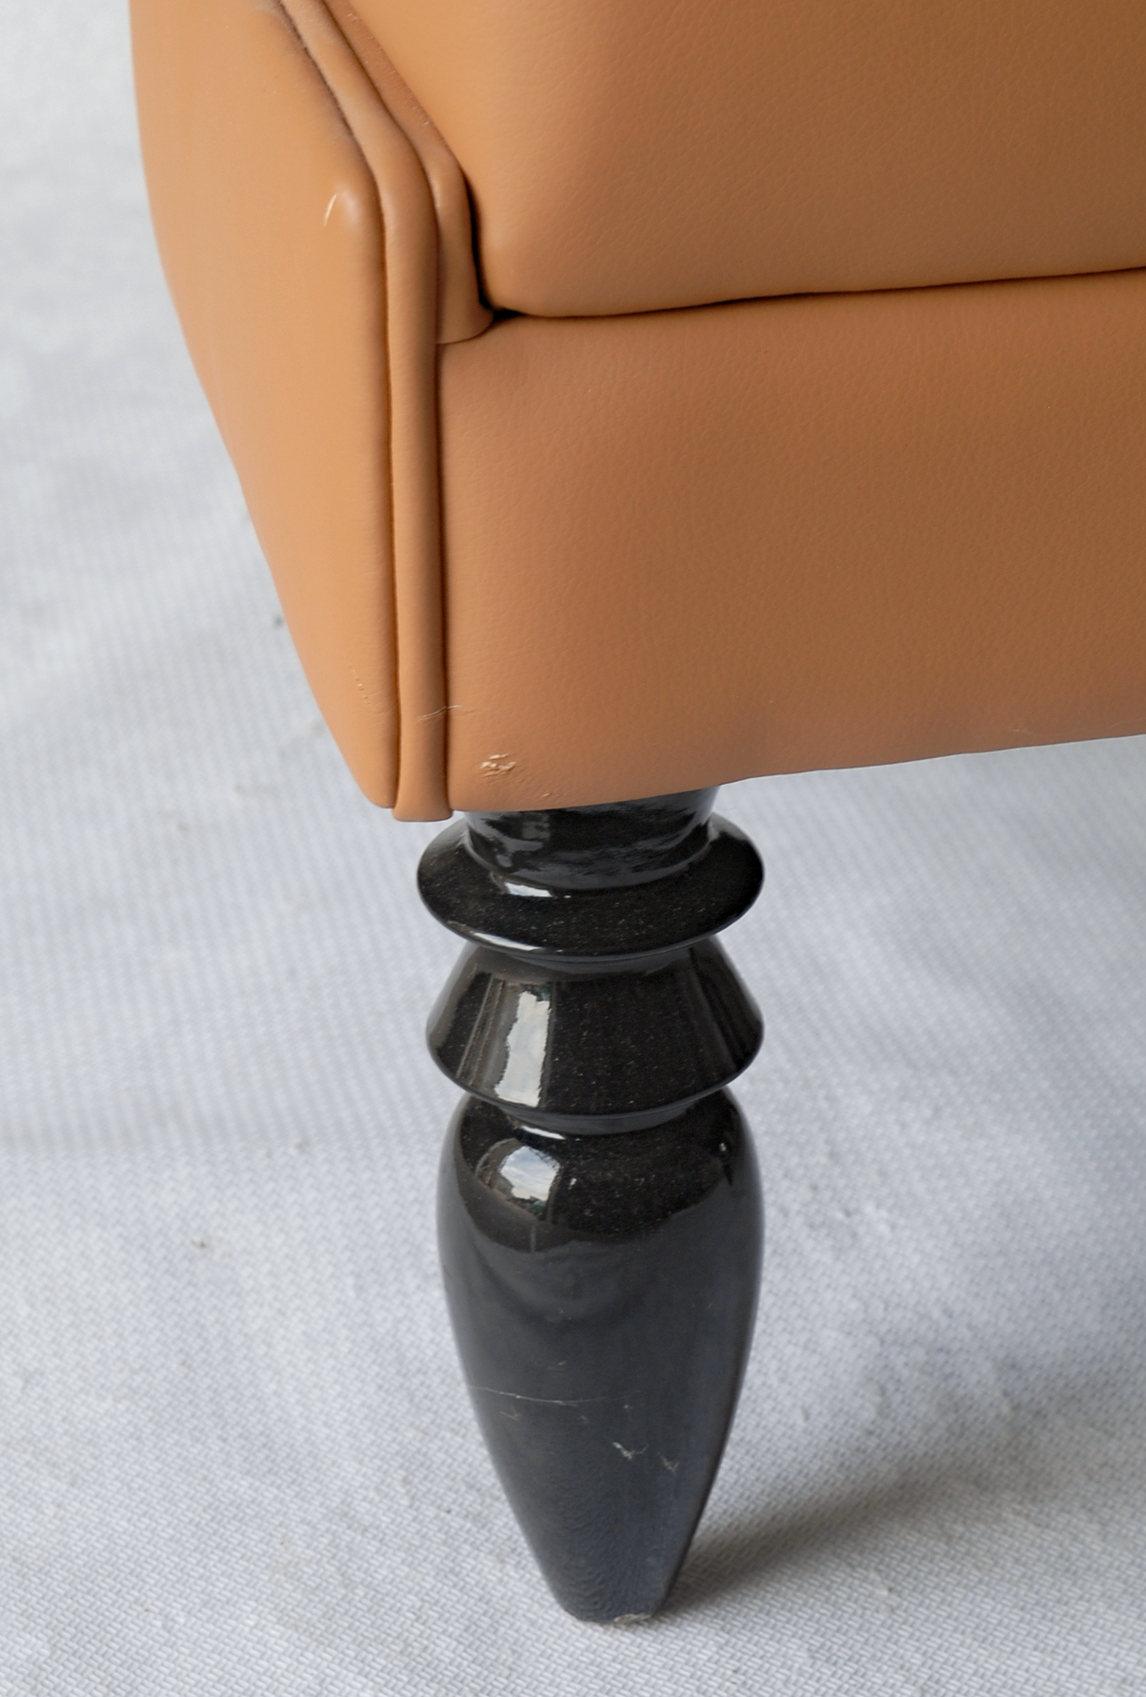 Contemporary Lounge Tufted Armchair, Italian Fiore Leather, Black Lacquered Ponti Style Legs